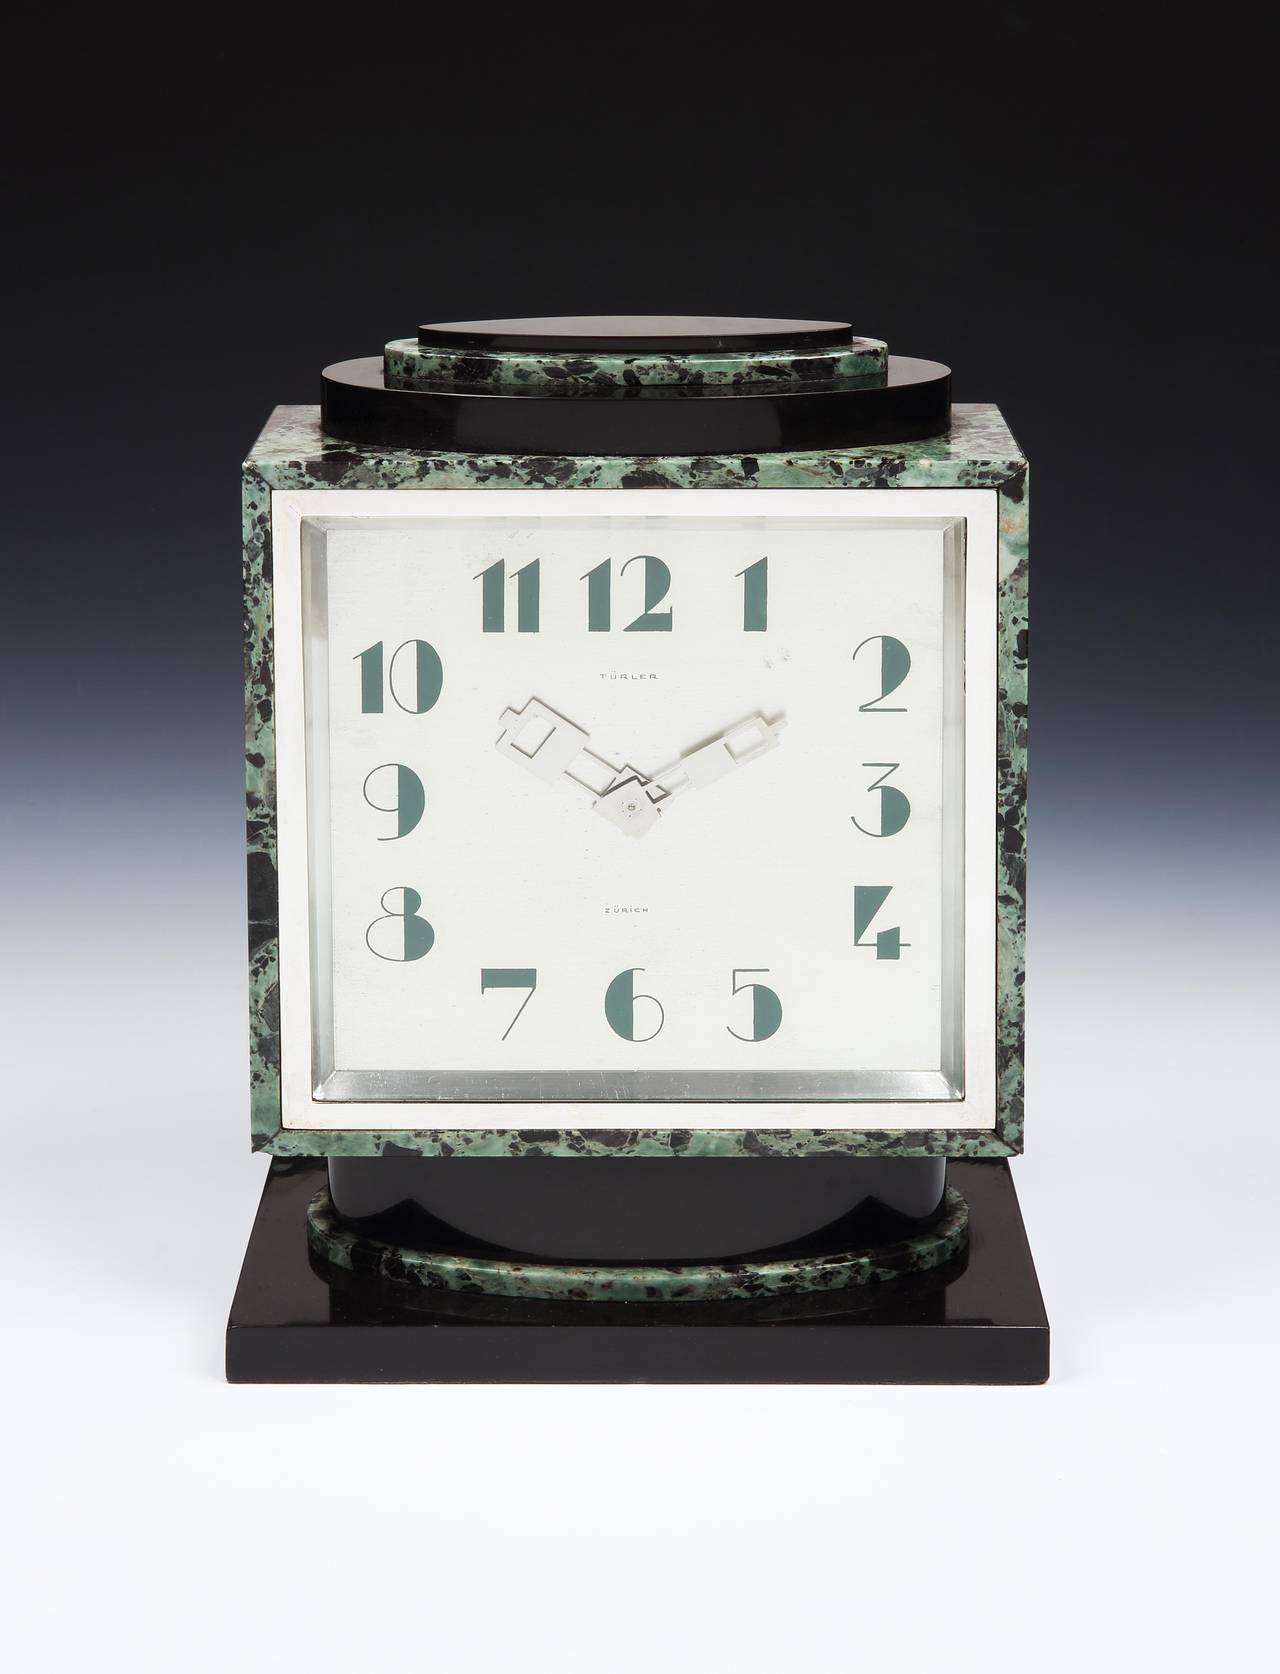 A strikingly modern Art Deco mantel clock, the main body in verde antico marble, with architectural, stepped detailing in polished black marble. The brushed, silvered-bronze clock face with modernist numerals, accented by hands of a pierced design.